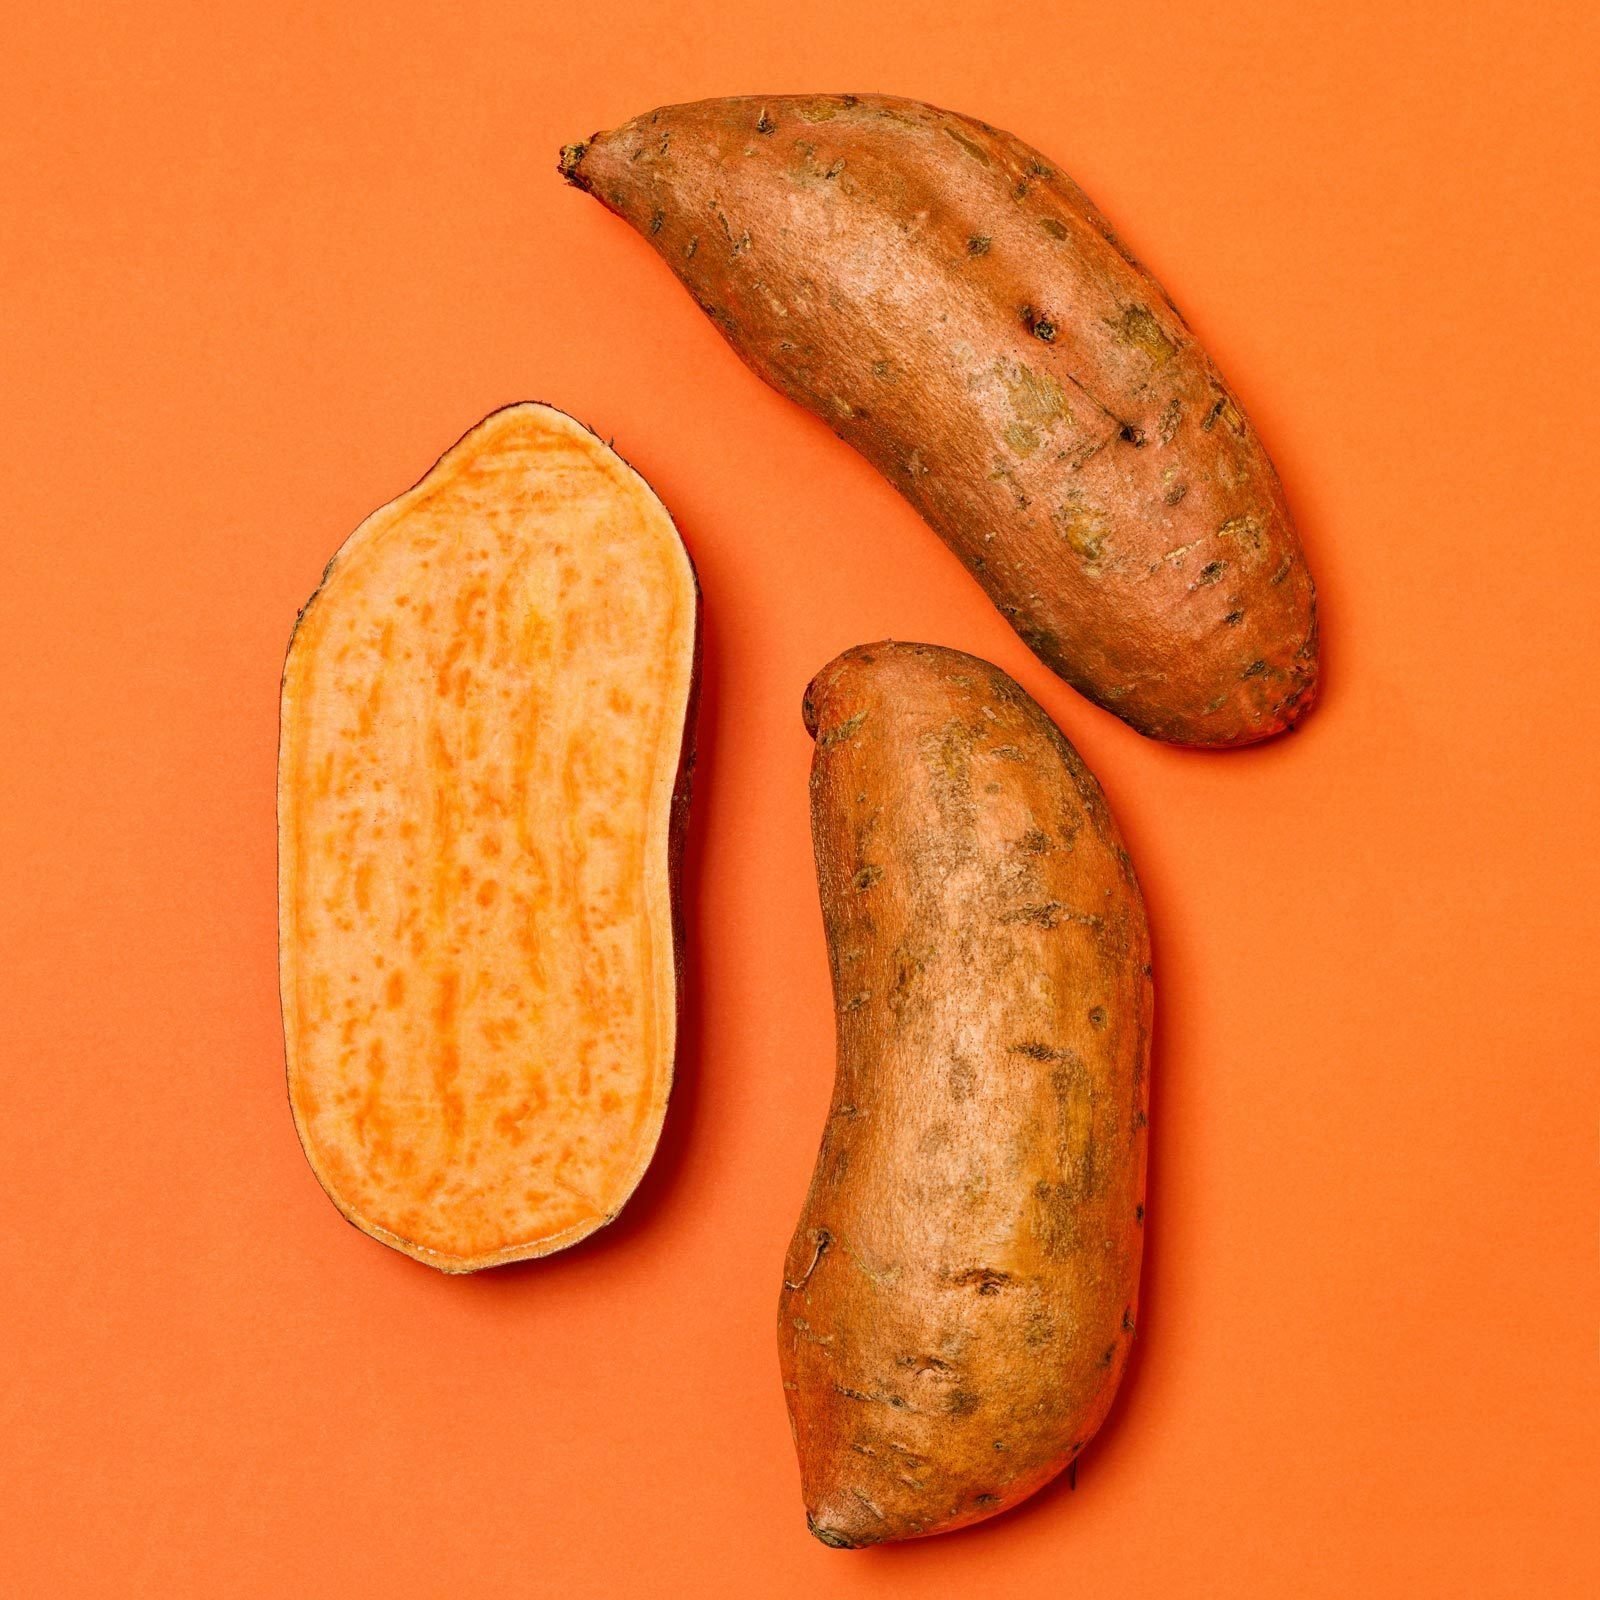 If You Don’t Eat Sweet Potatoes Every Day, This Might Convince You to Start